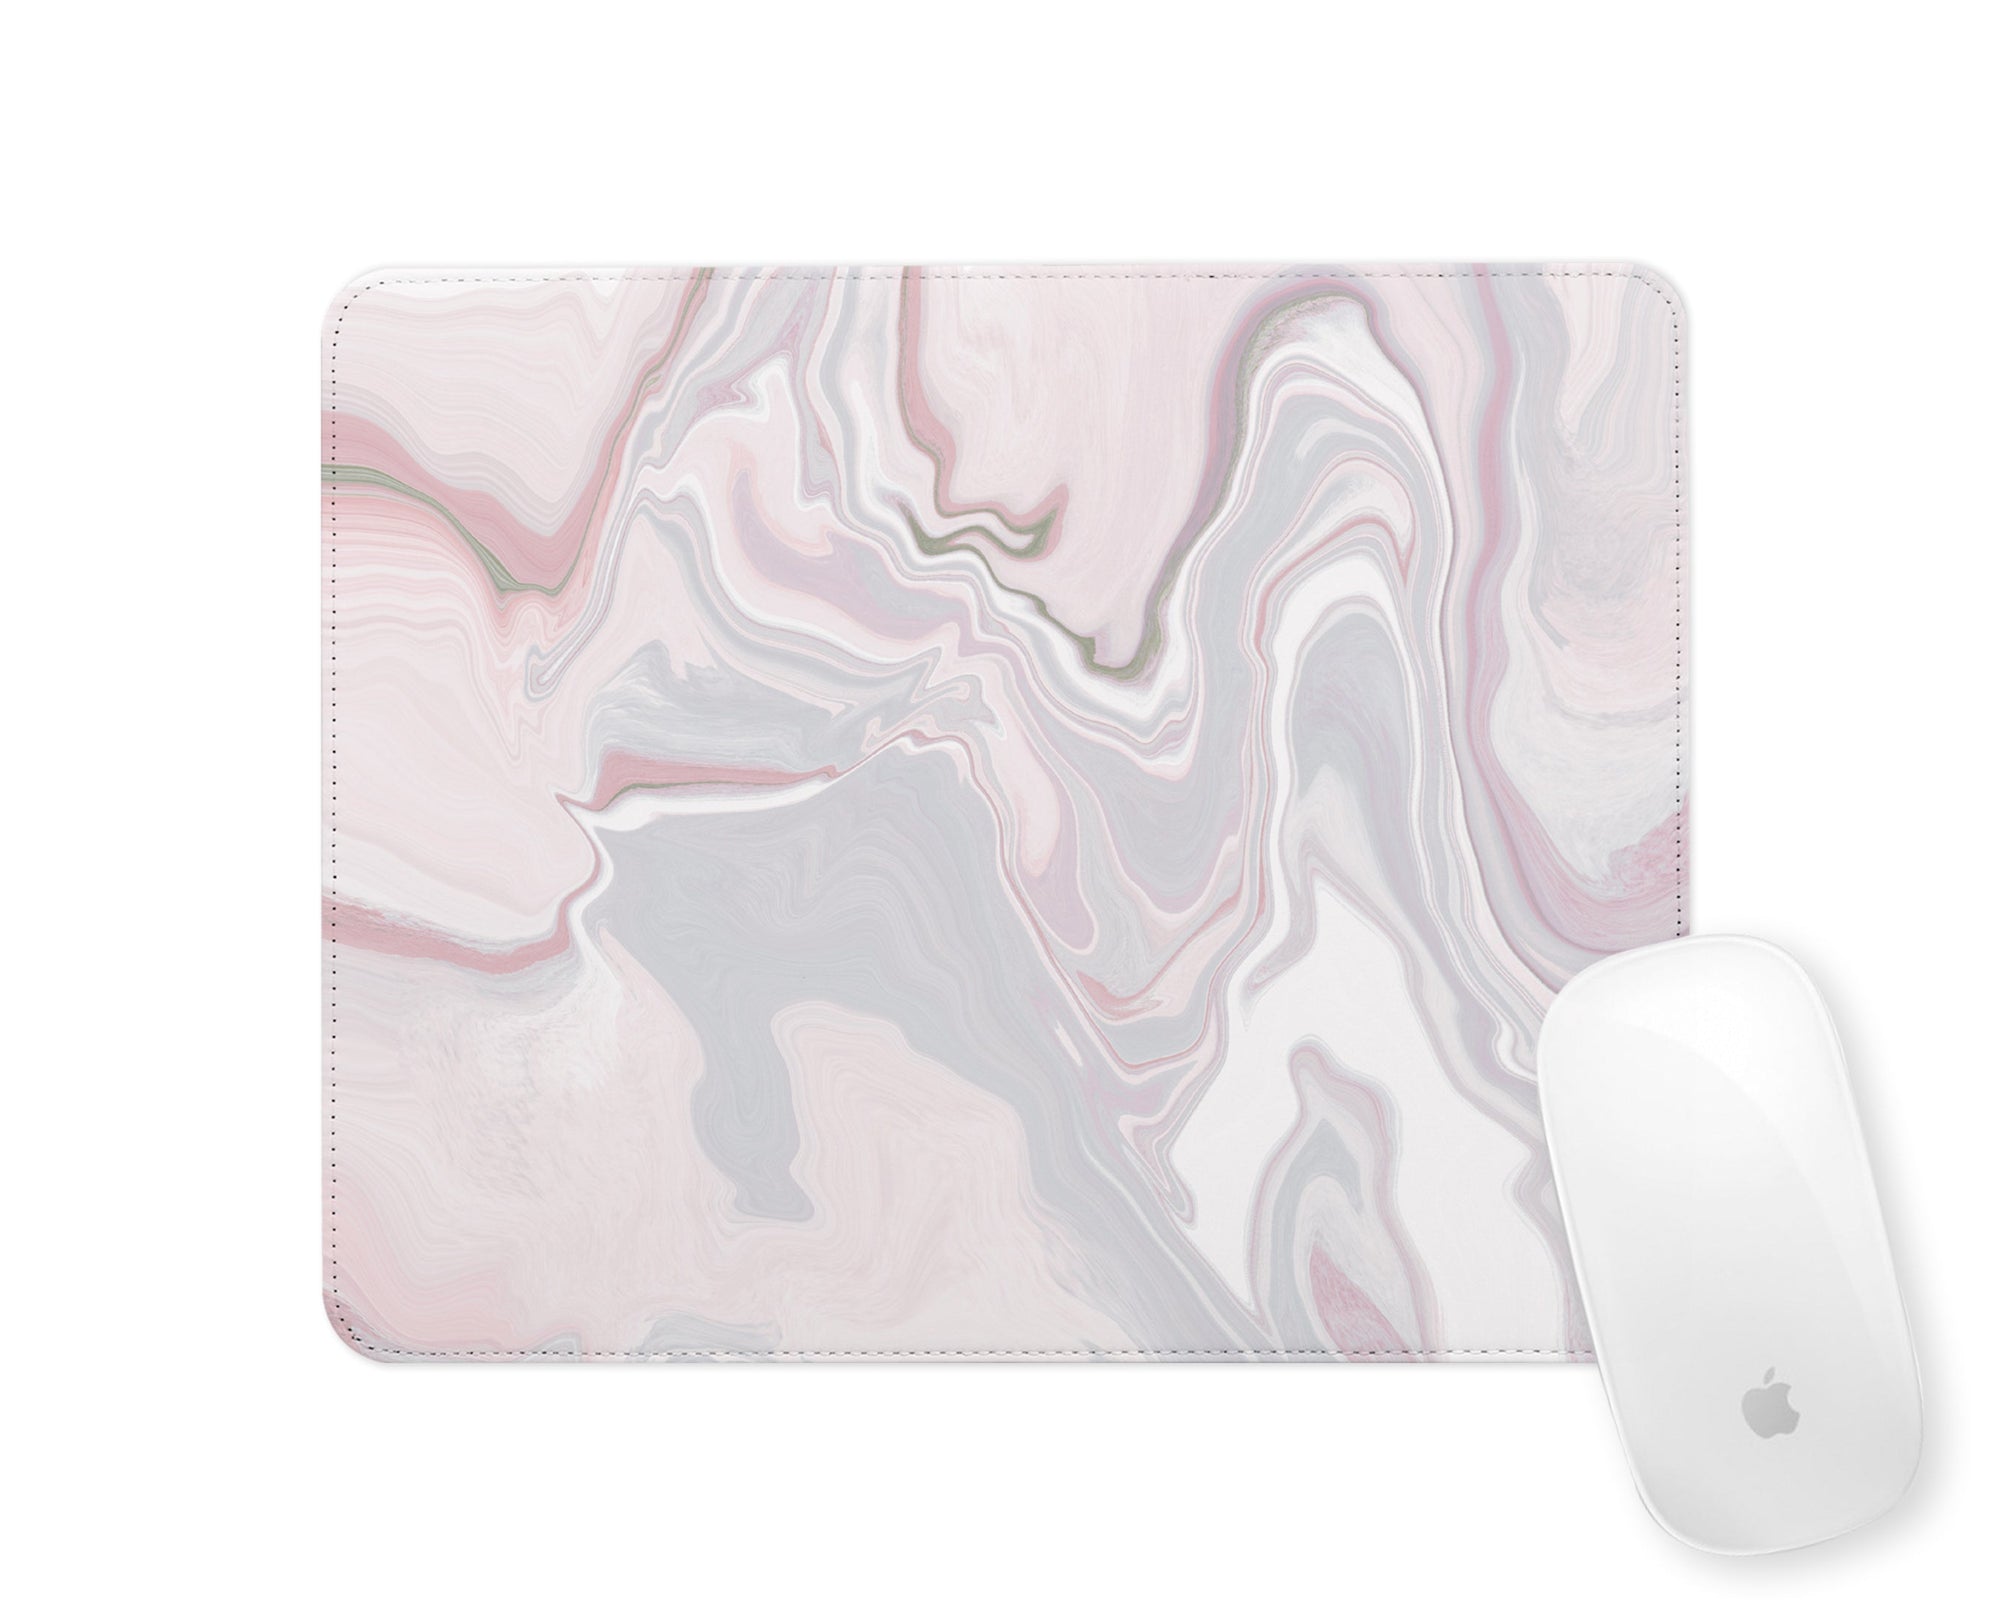 Mousemat | Marble Abstract | Pink